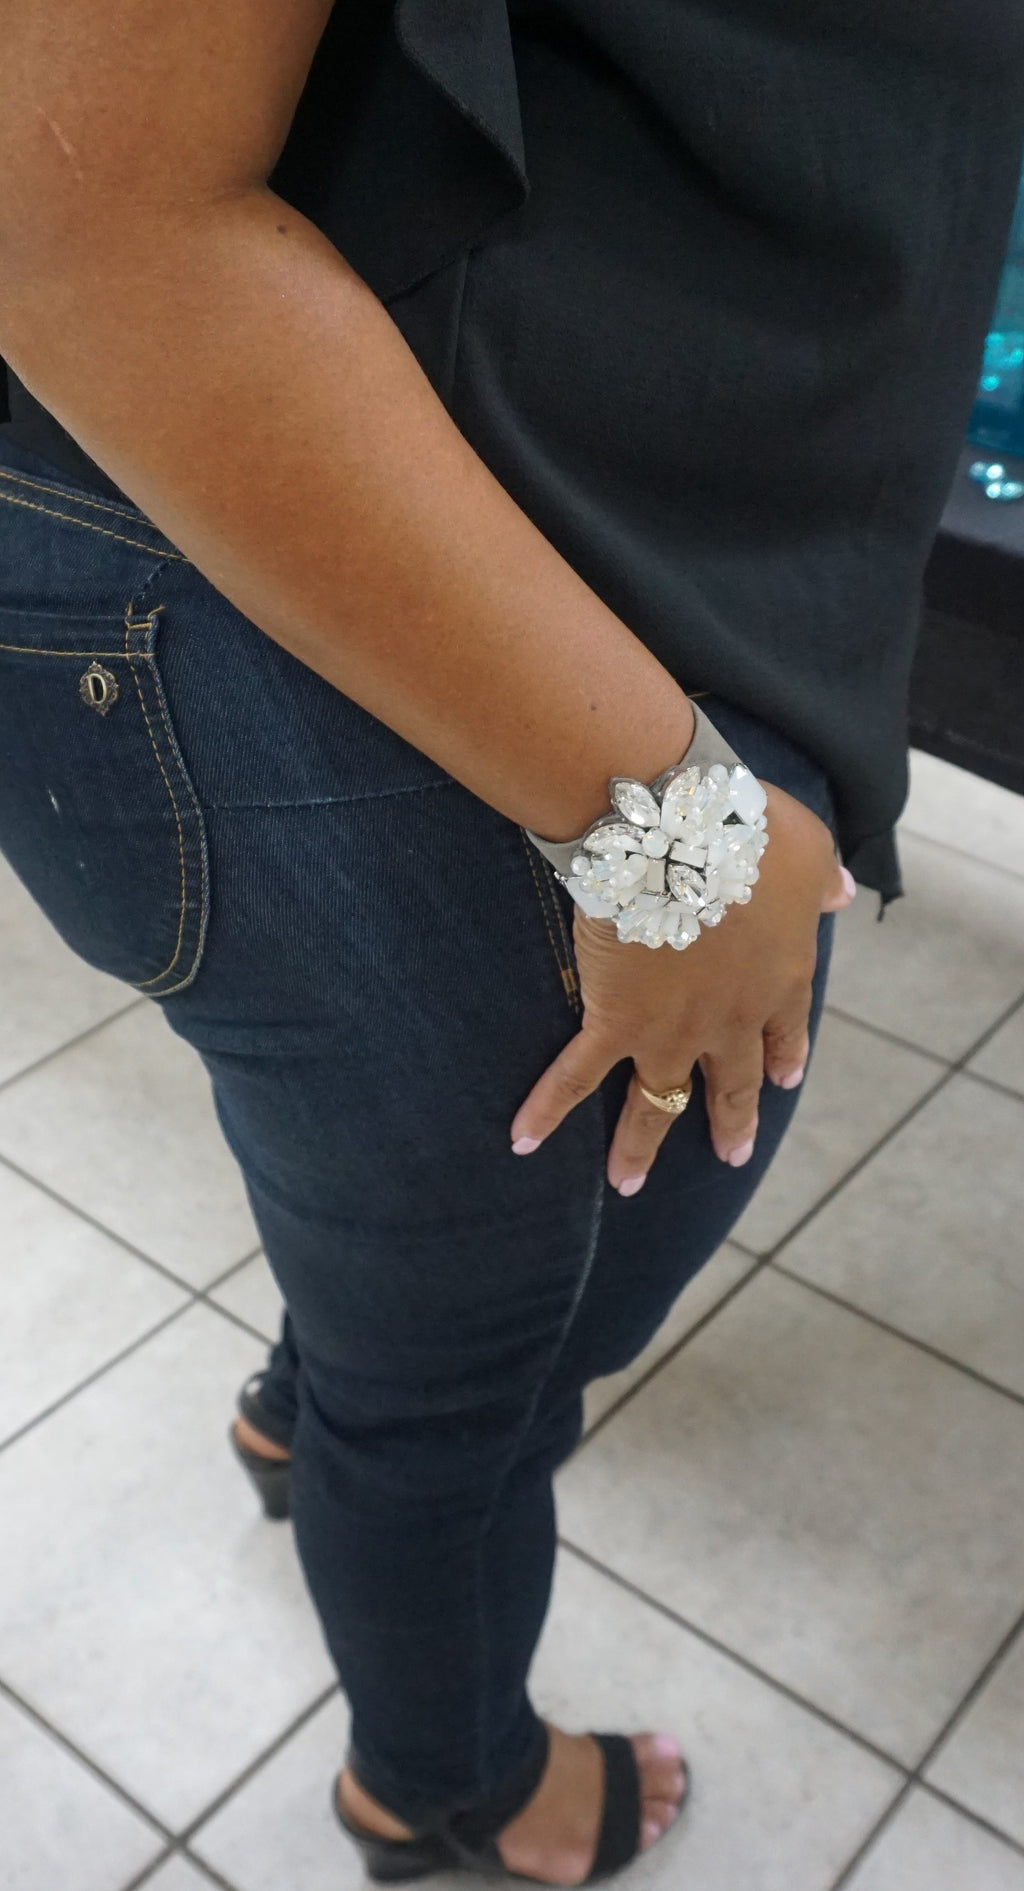 Elegant Floral Inspired Bracelet Cuff - Modern Angles Style and Class